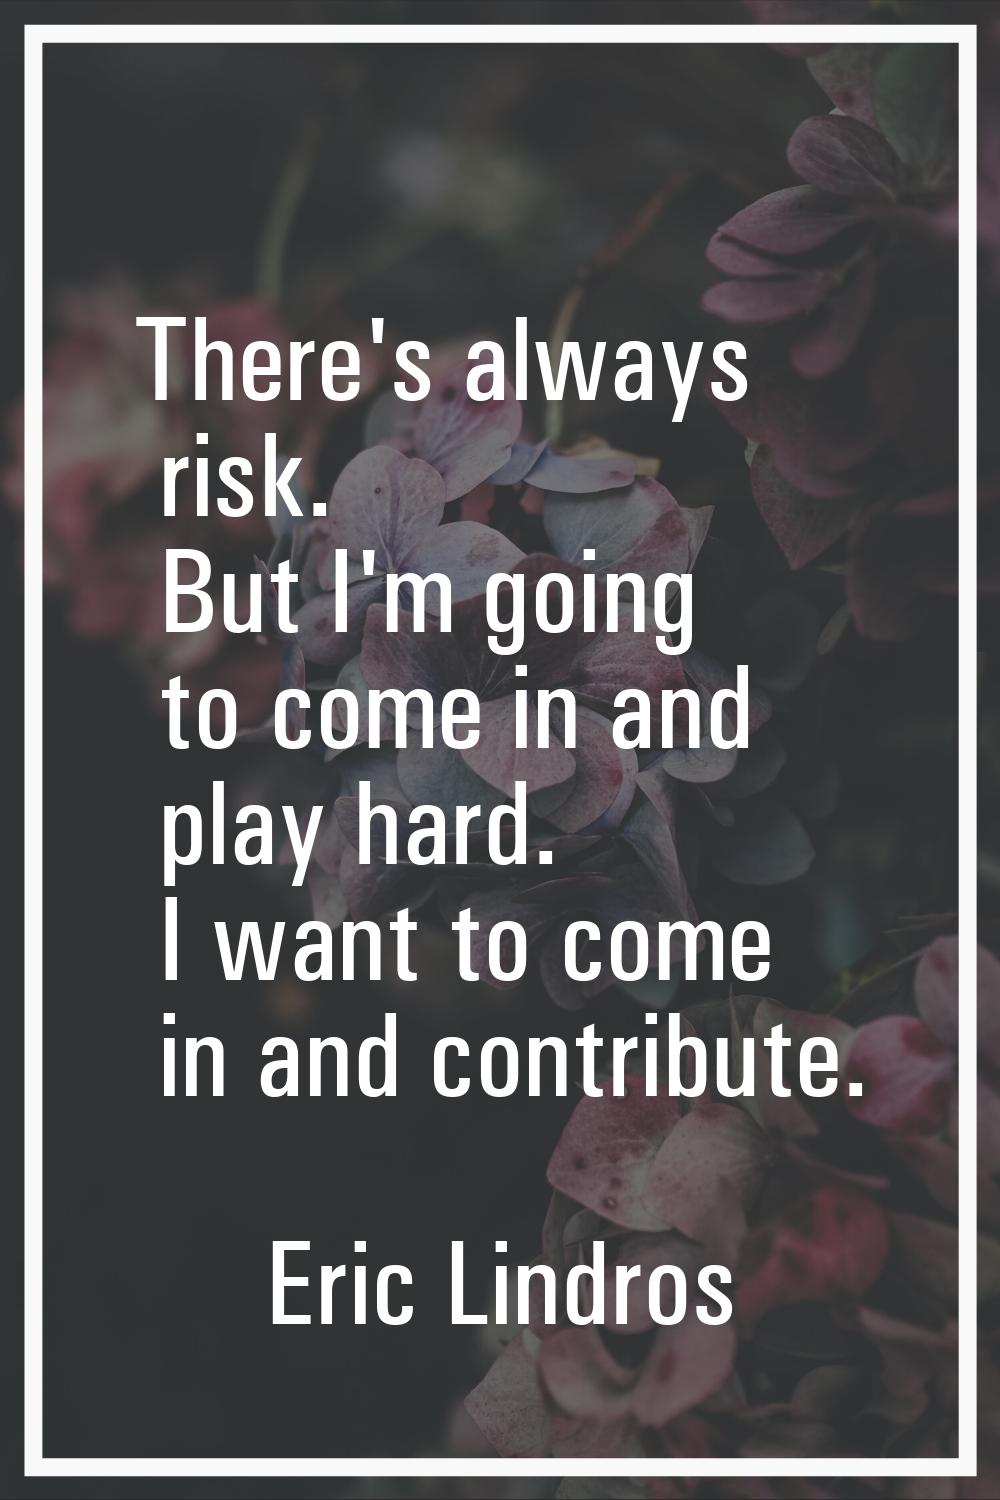 There's always risk. But I'm going to come in and play hard. I want to come in and contribute.